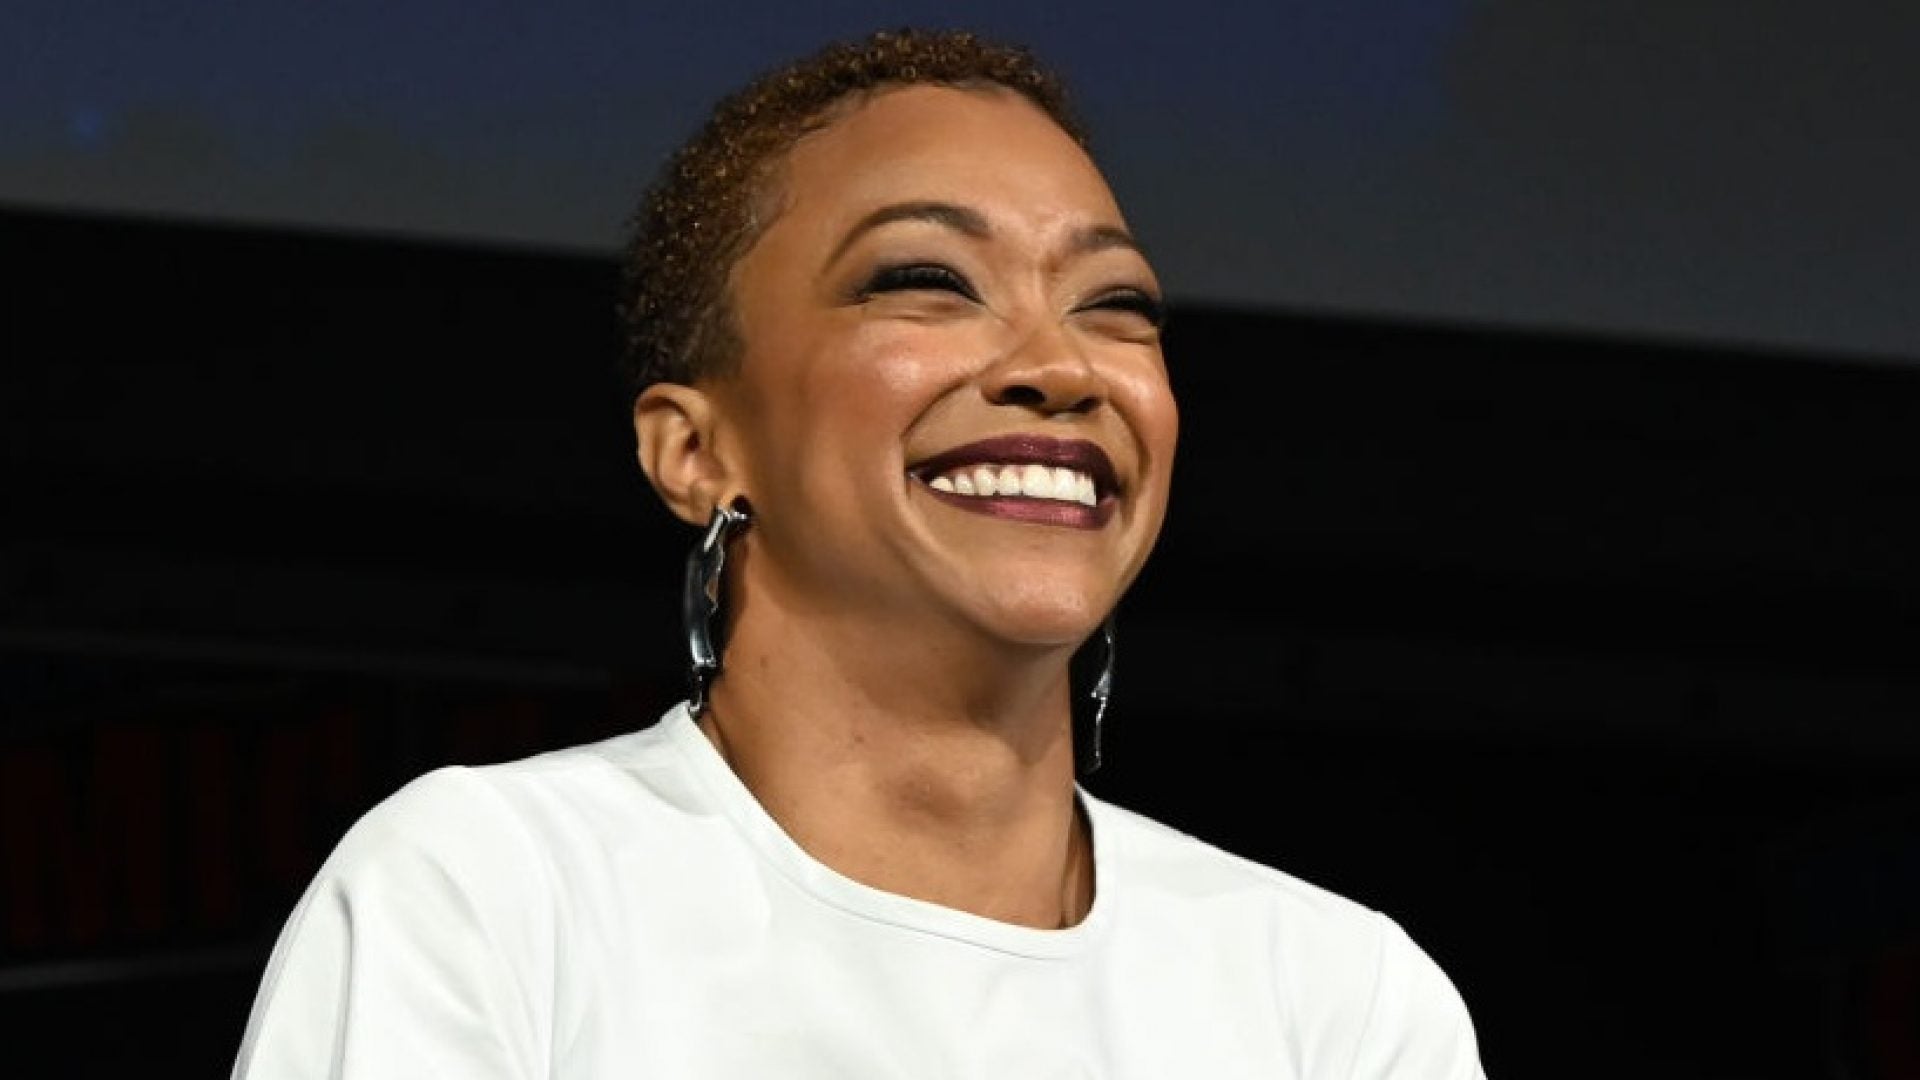 Sonequa Martin-Green On How She Got To Rock Her Short Natural Haircut In 'Space Jam'